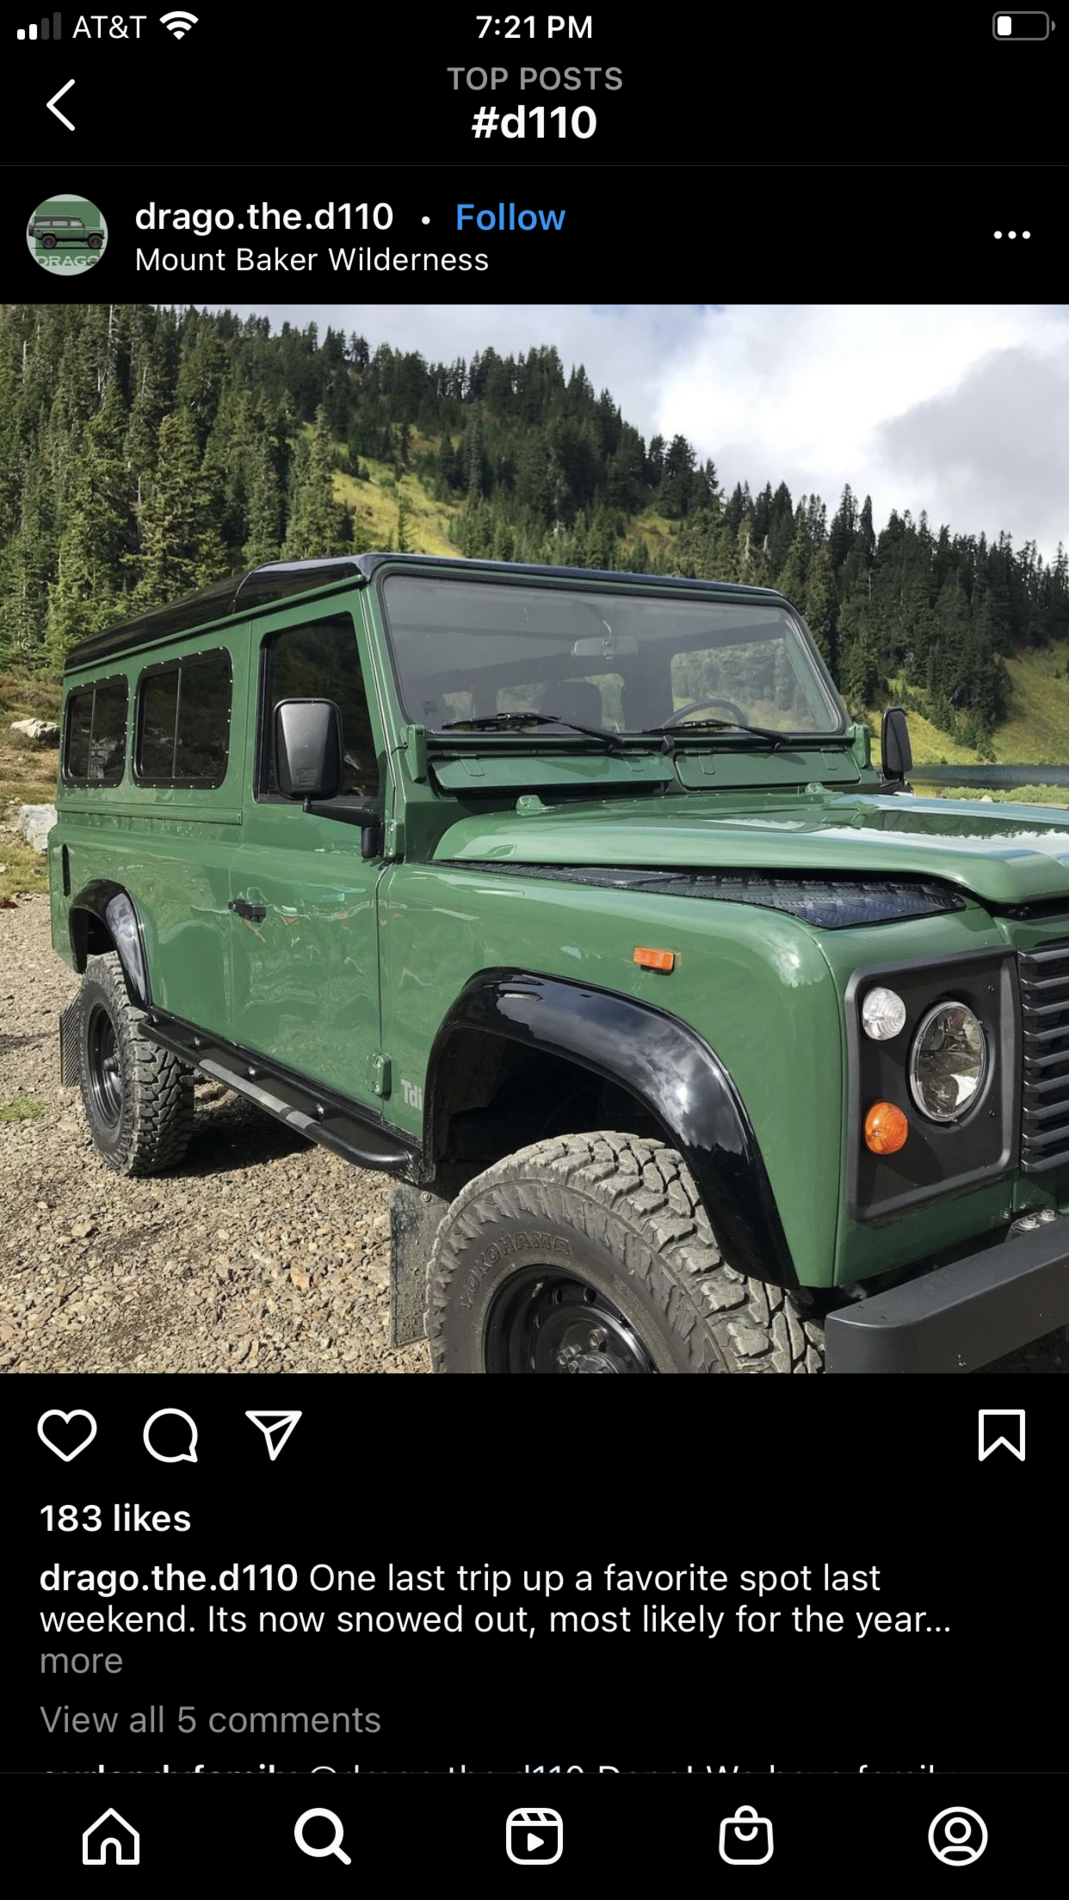 Ford Bronco Ford confirms a green 2022 Bronco color for MY22! *Not Filson Wildland Fire Rig Green* BC298788-7528-44C4-9118-C27E83DCD5BC